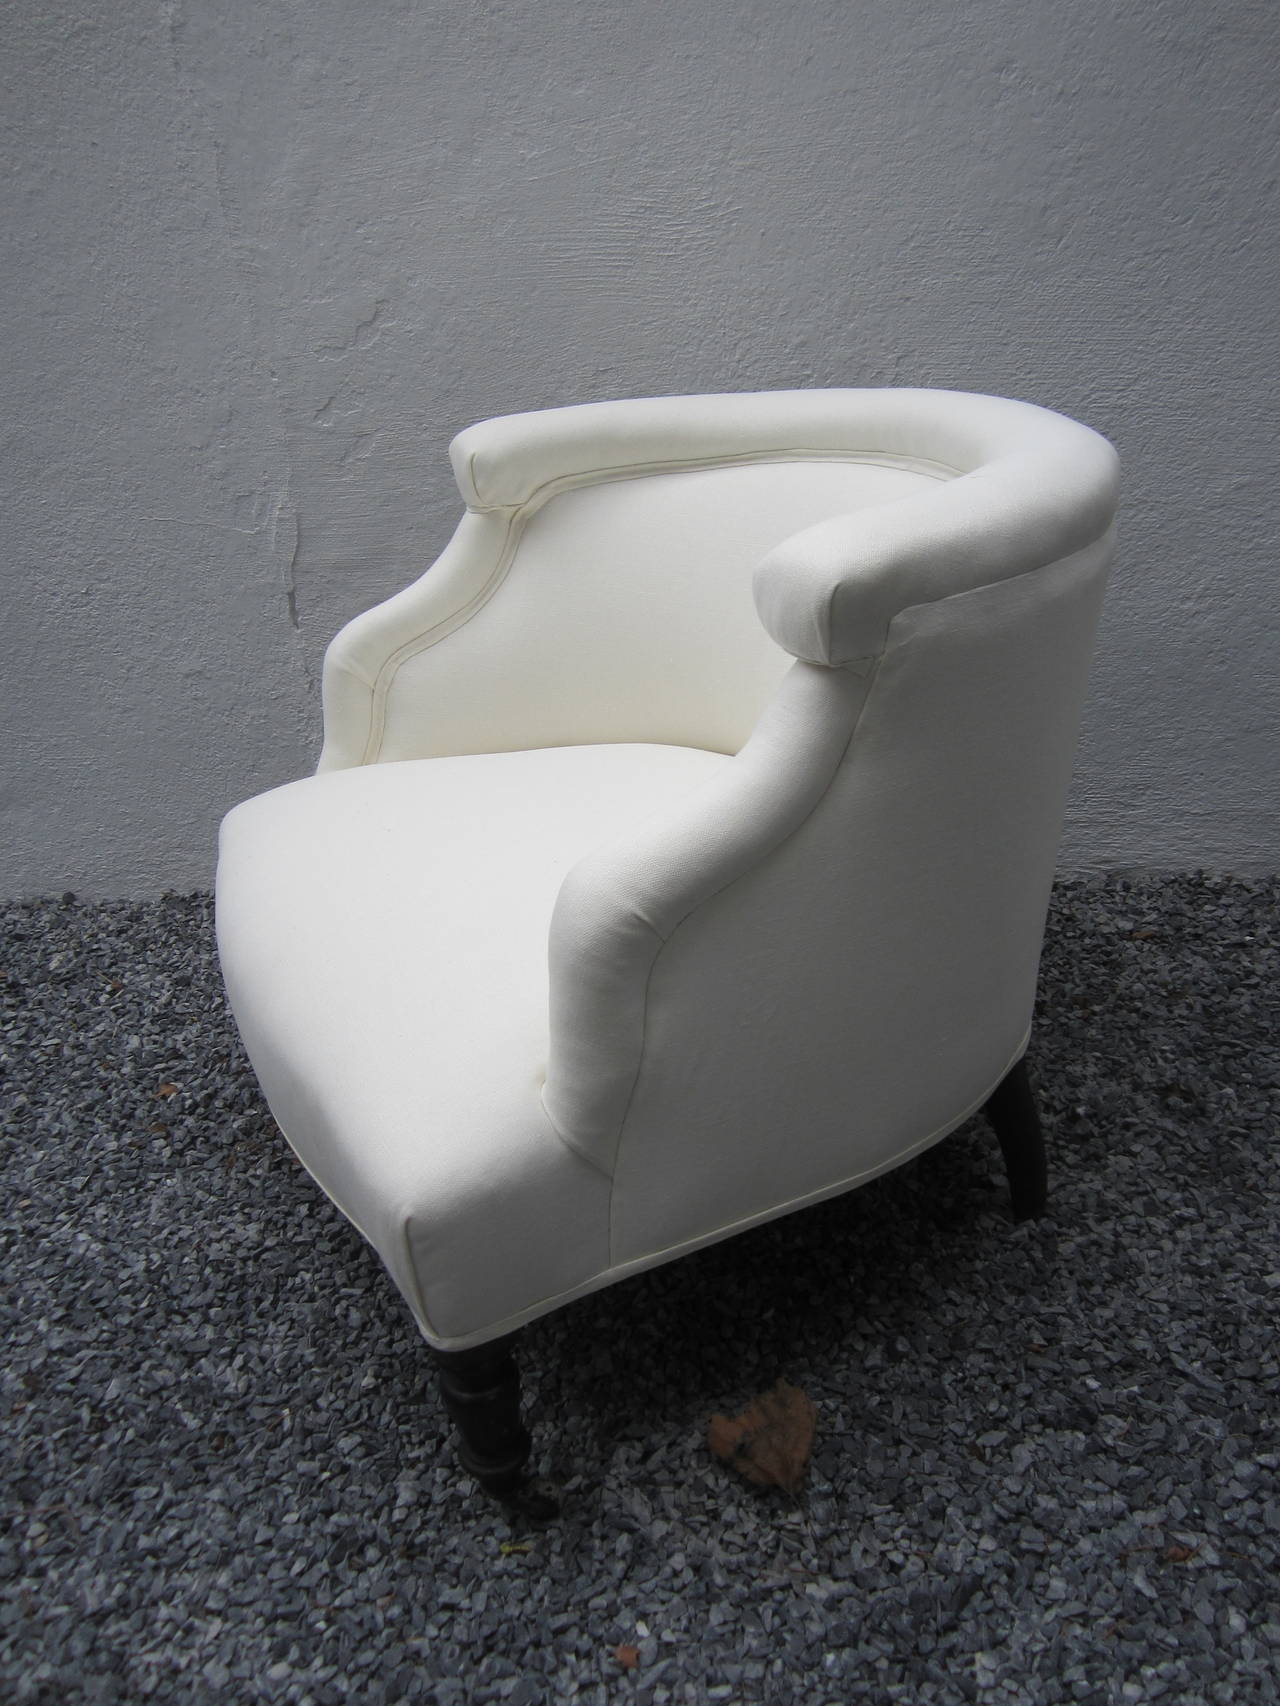 19th century barrel chair newly upholstered in white linen....black painted leg and four casters.